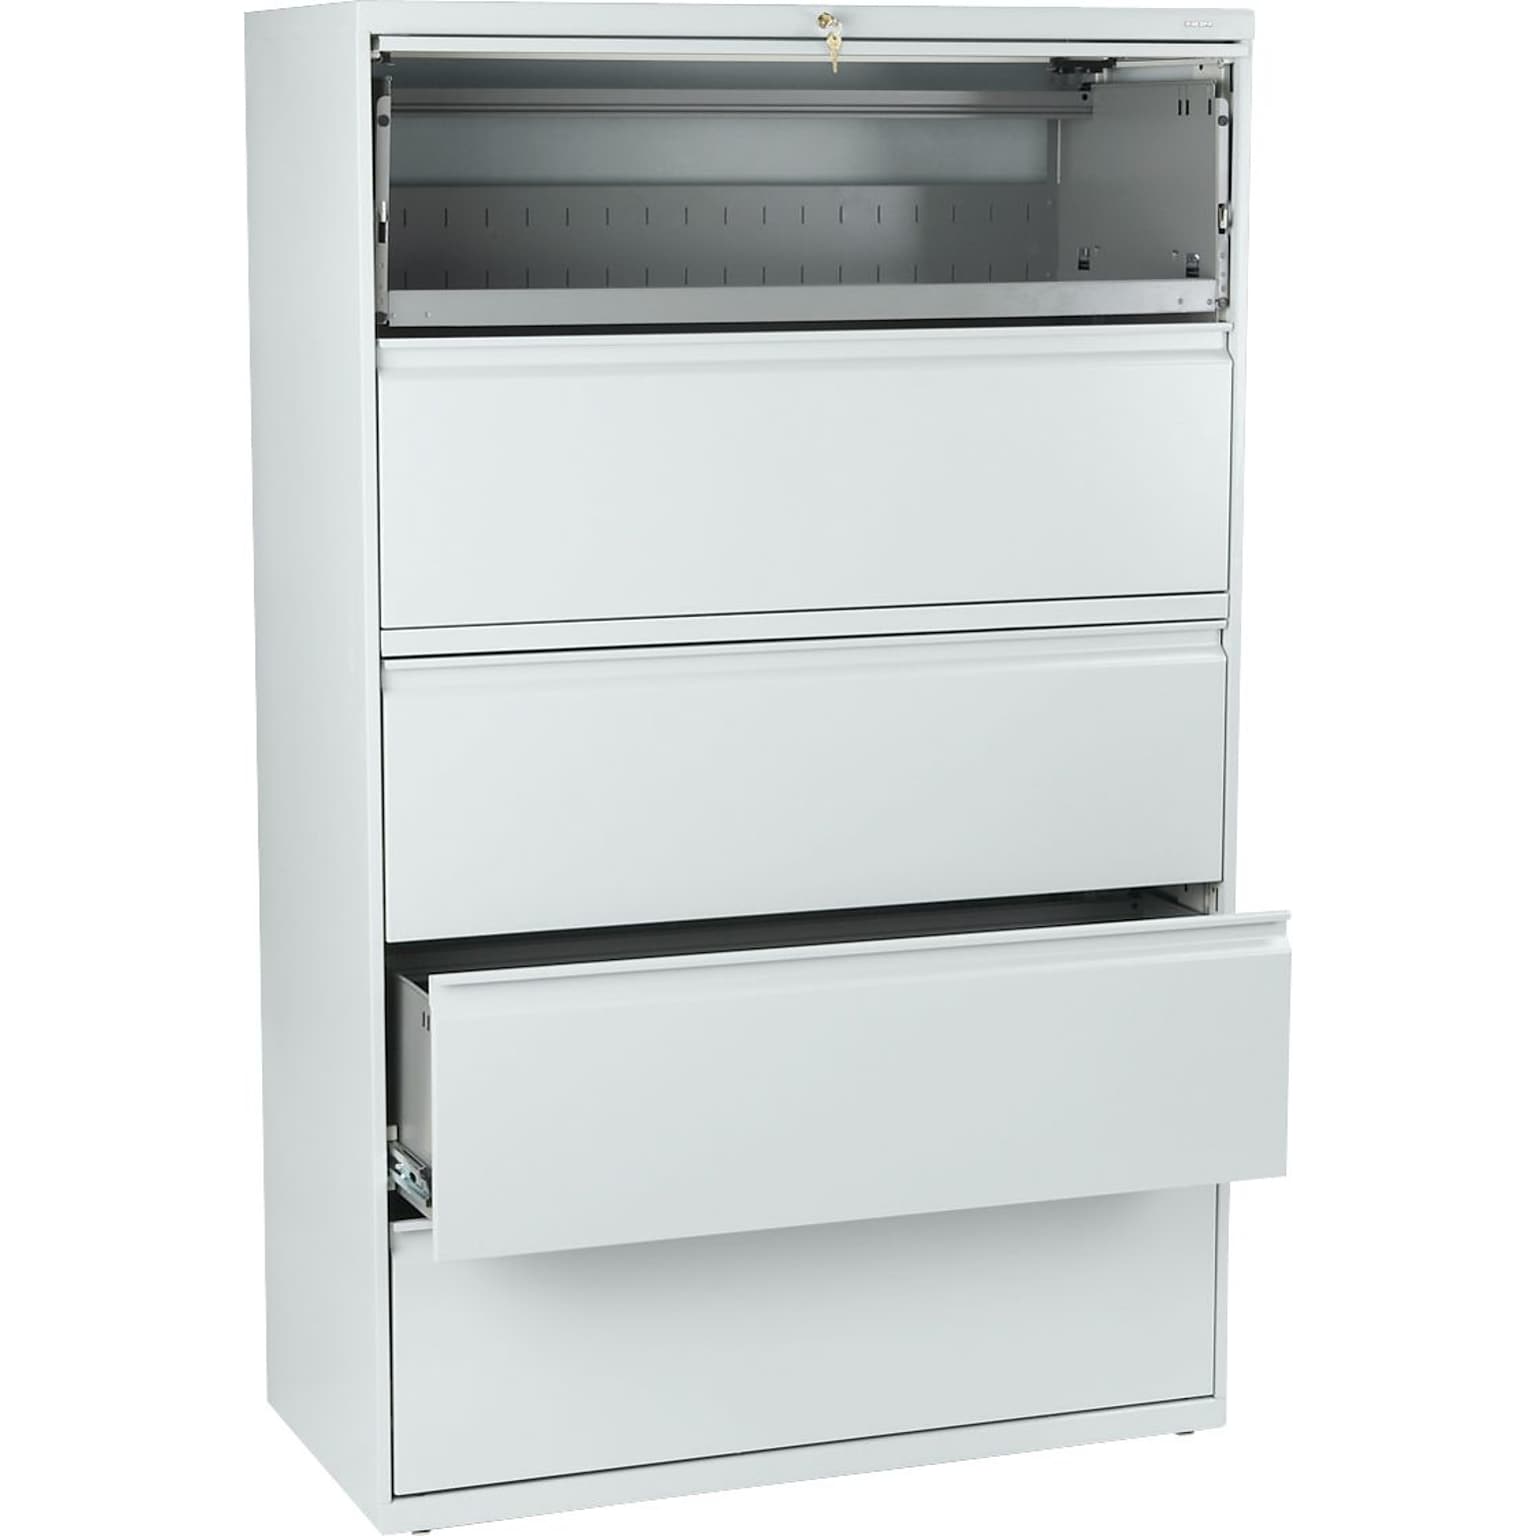 HON® Brigade™ 800 Series Lateral File Cabinet, 42 Wide, 5-Drawer, Light Gray